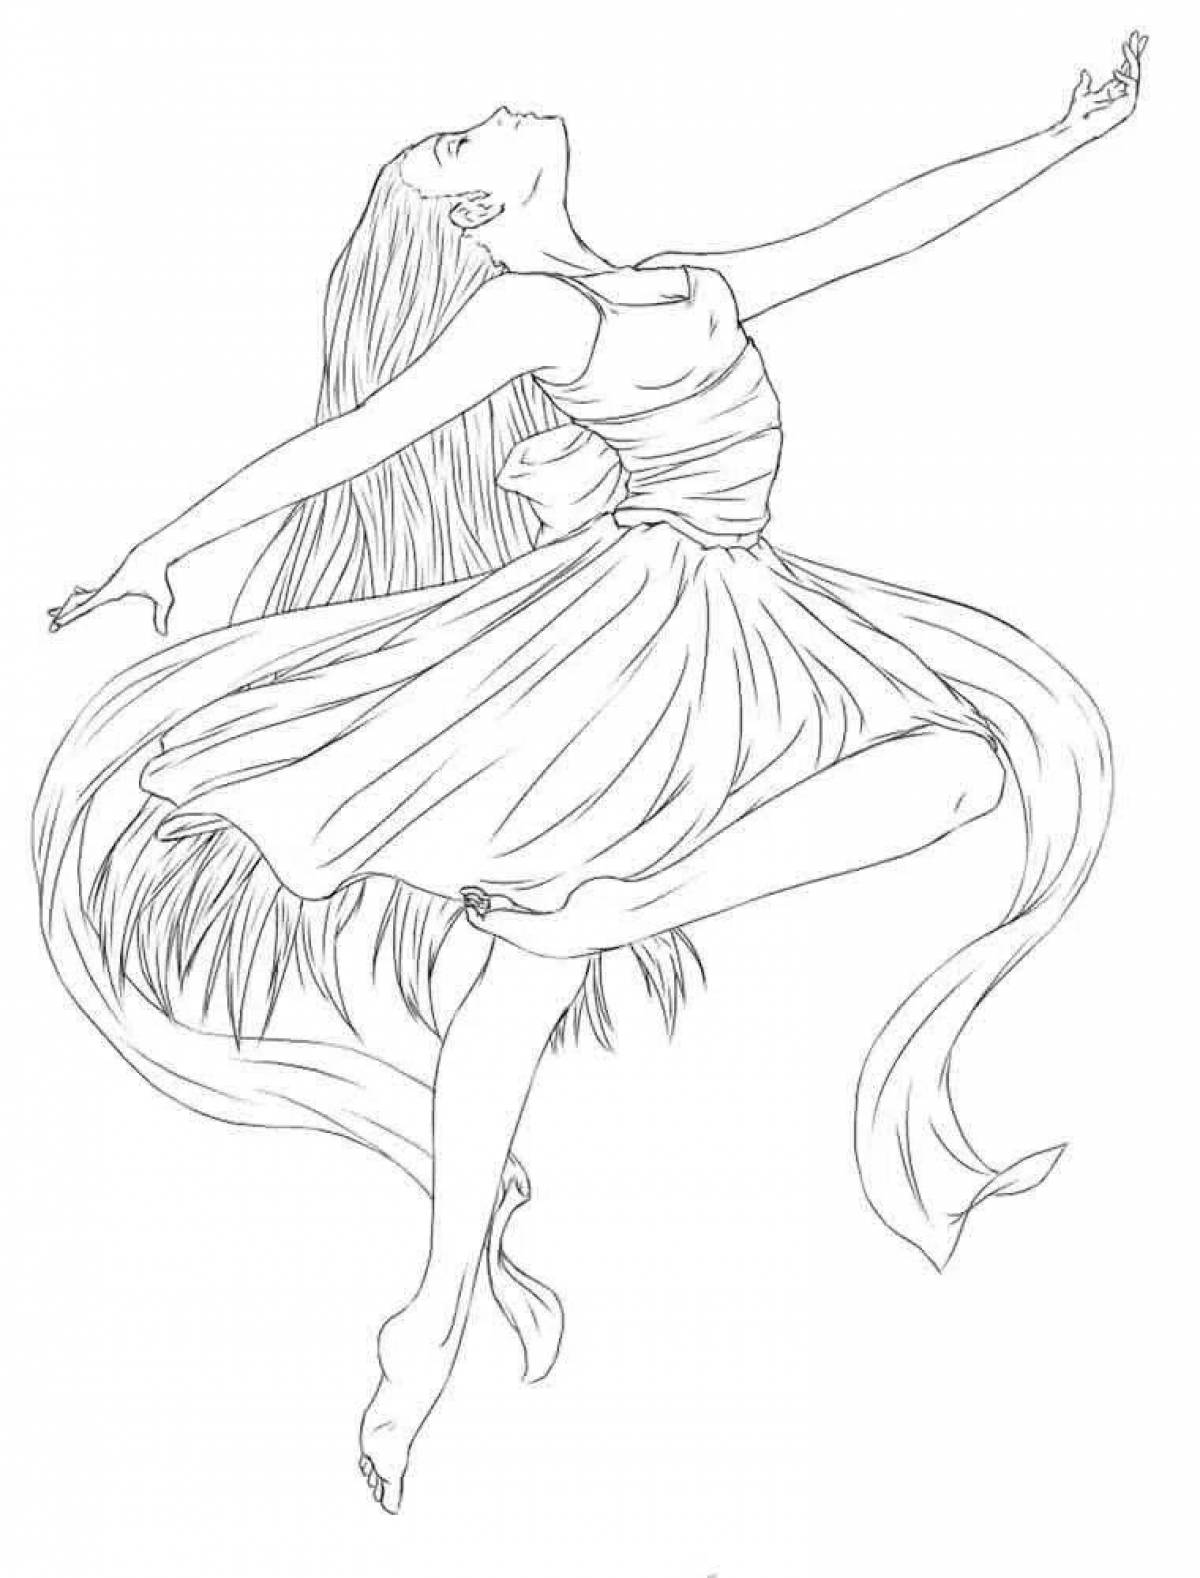 Coloring page glowing dancer